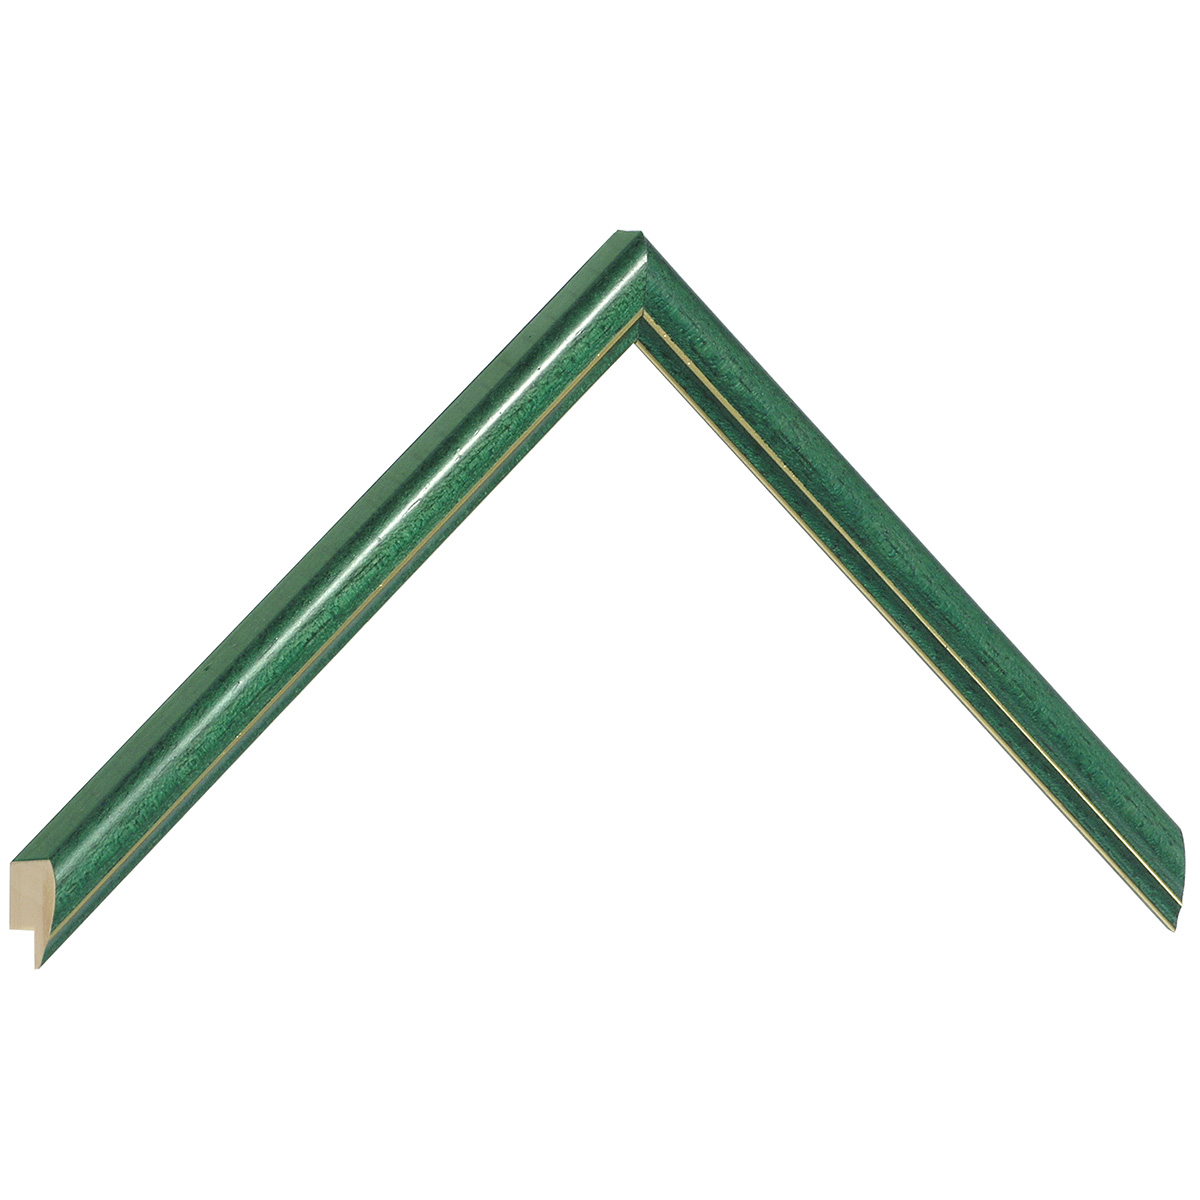 Moulding ayous jointed 13mm - green with golden edge - Sample